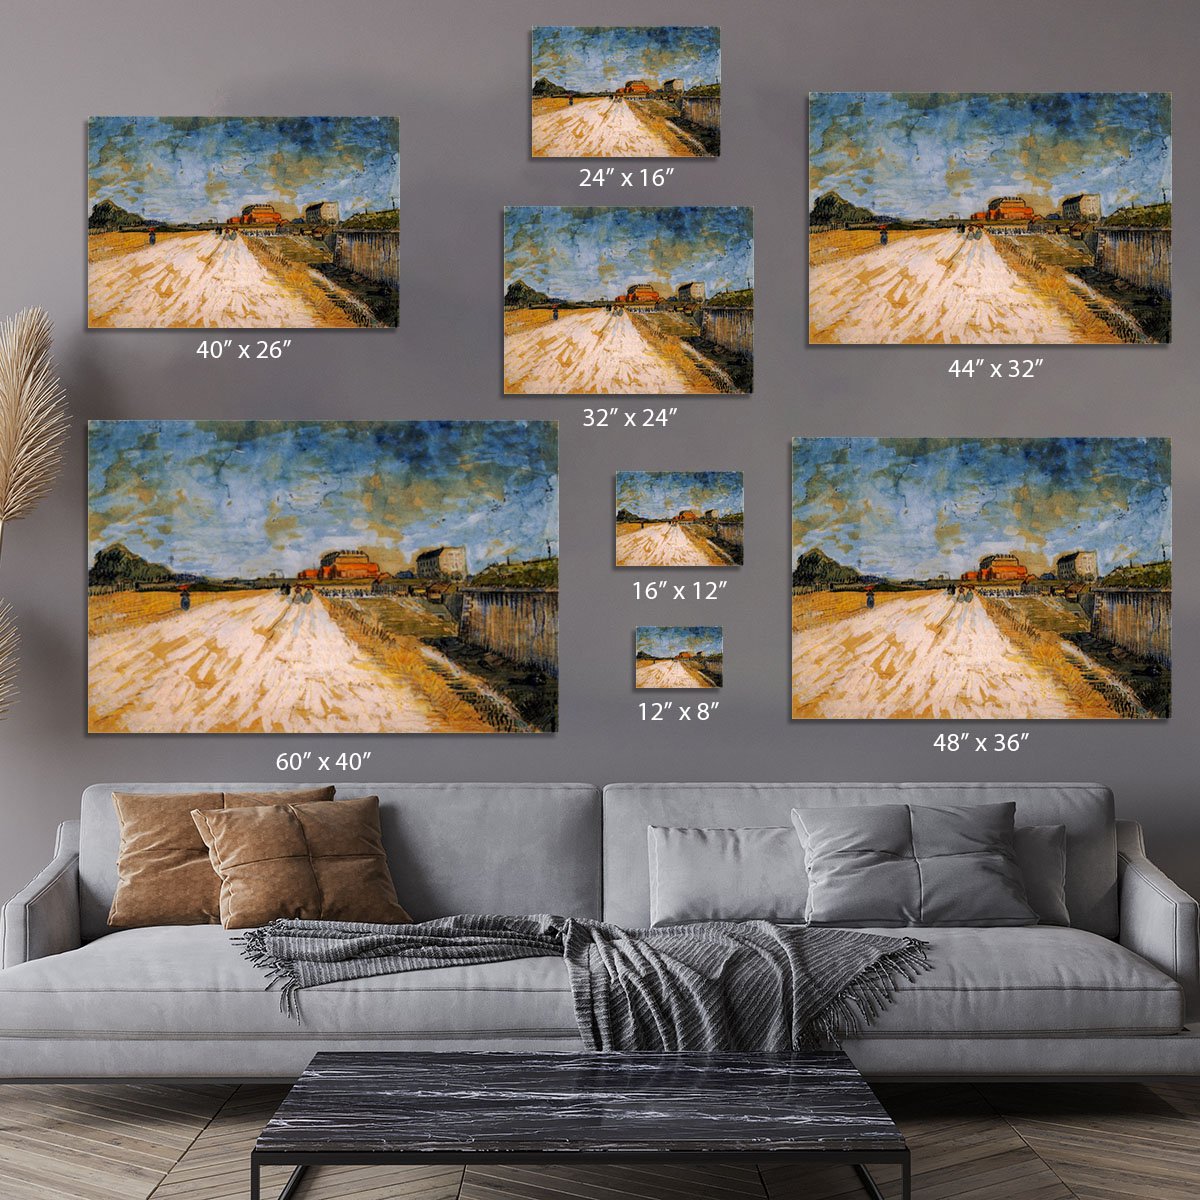 Road Running Beside the Paris Ramparts by Van Gogh Canvas Print or Poster